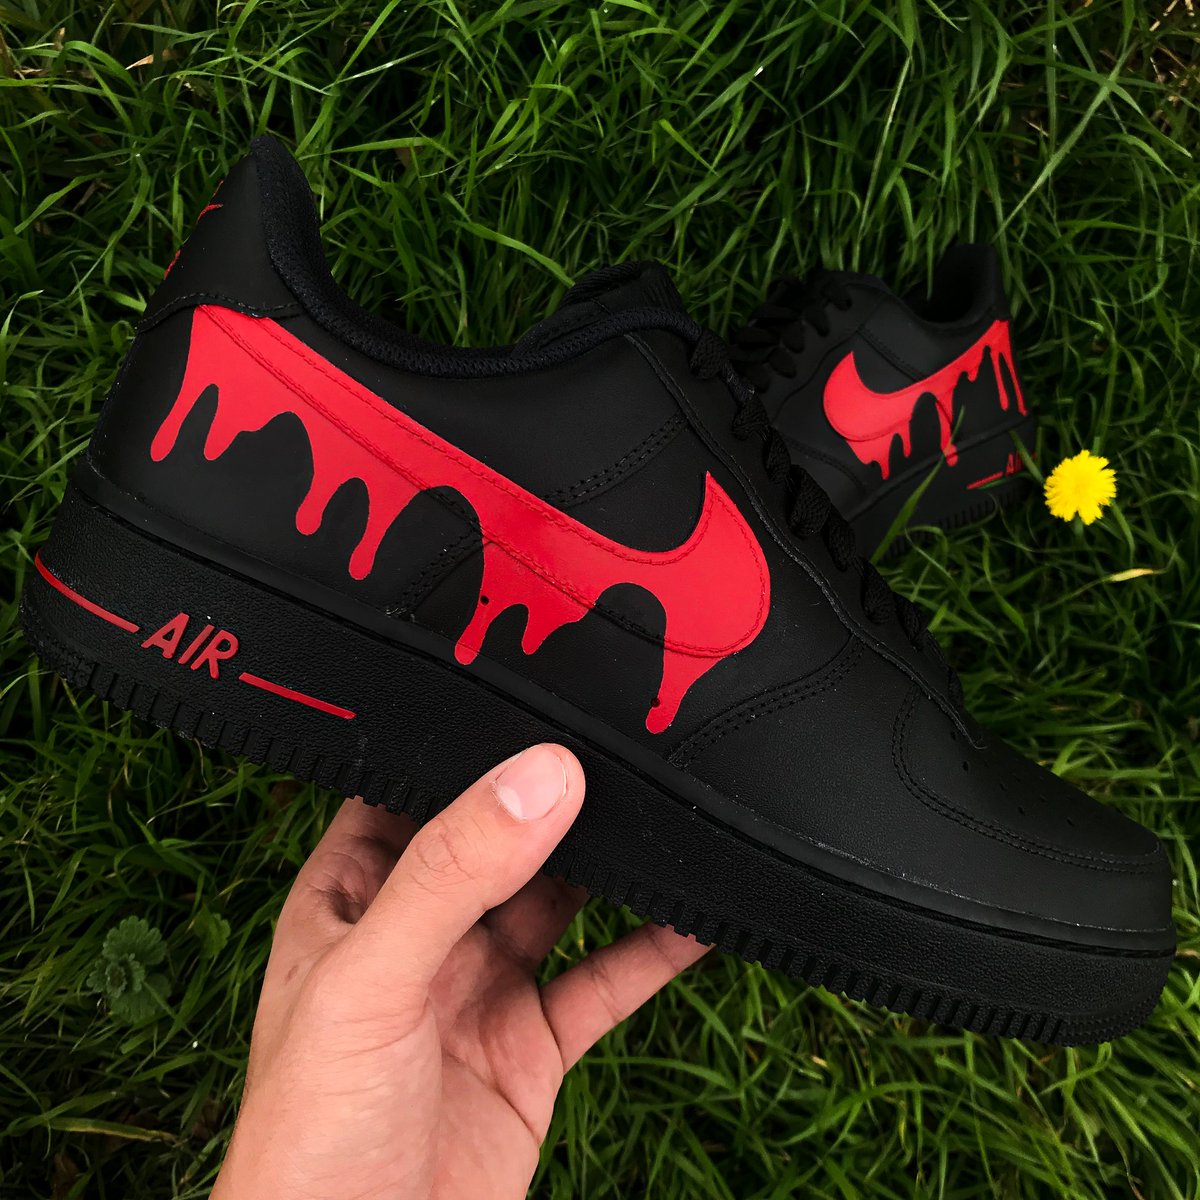 Nike Air Force 1 Custom Red LV Drip Size 12.5 New With Box